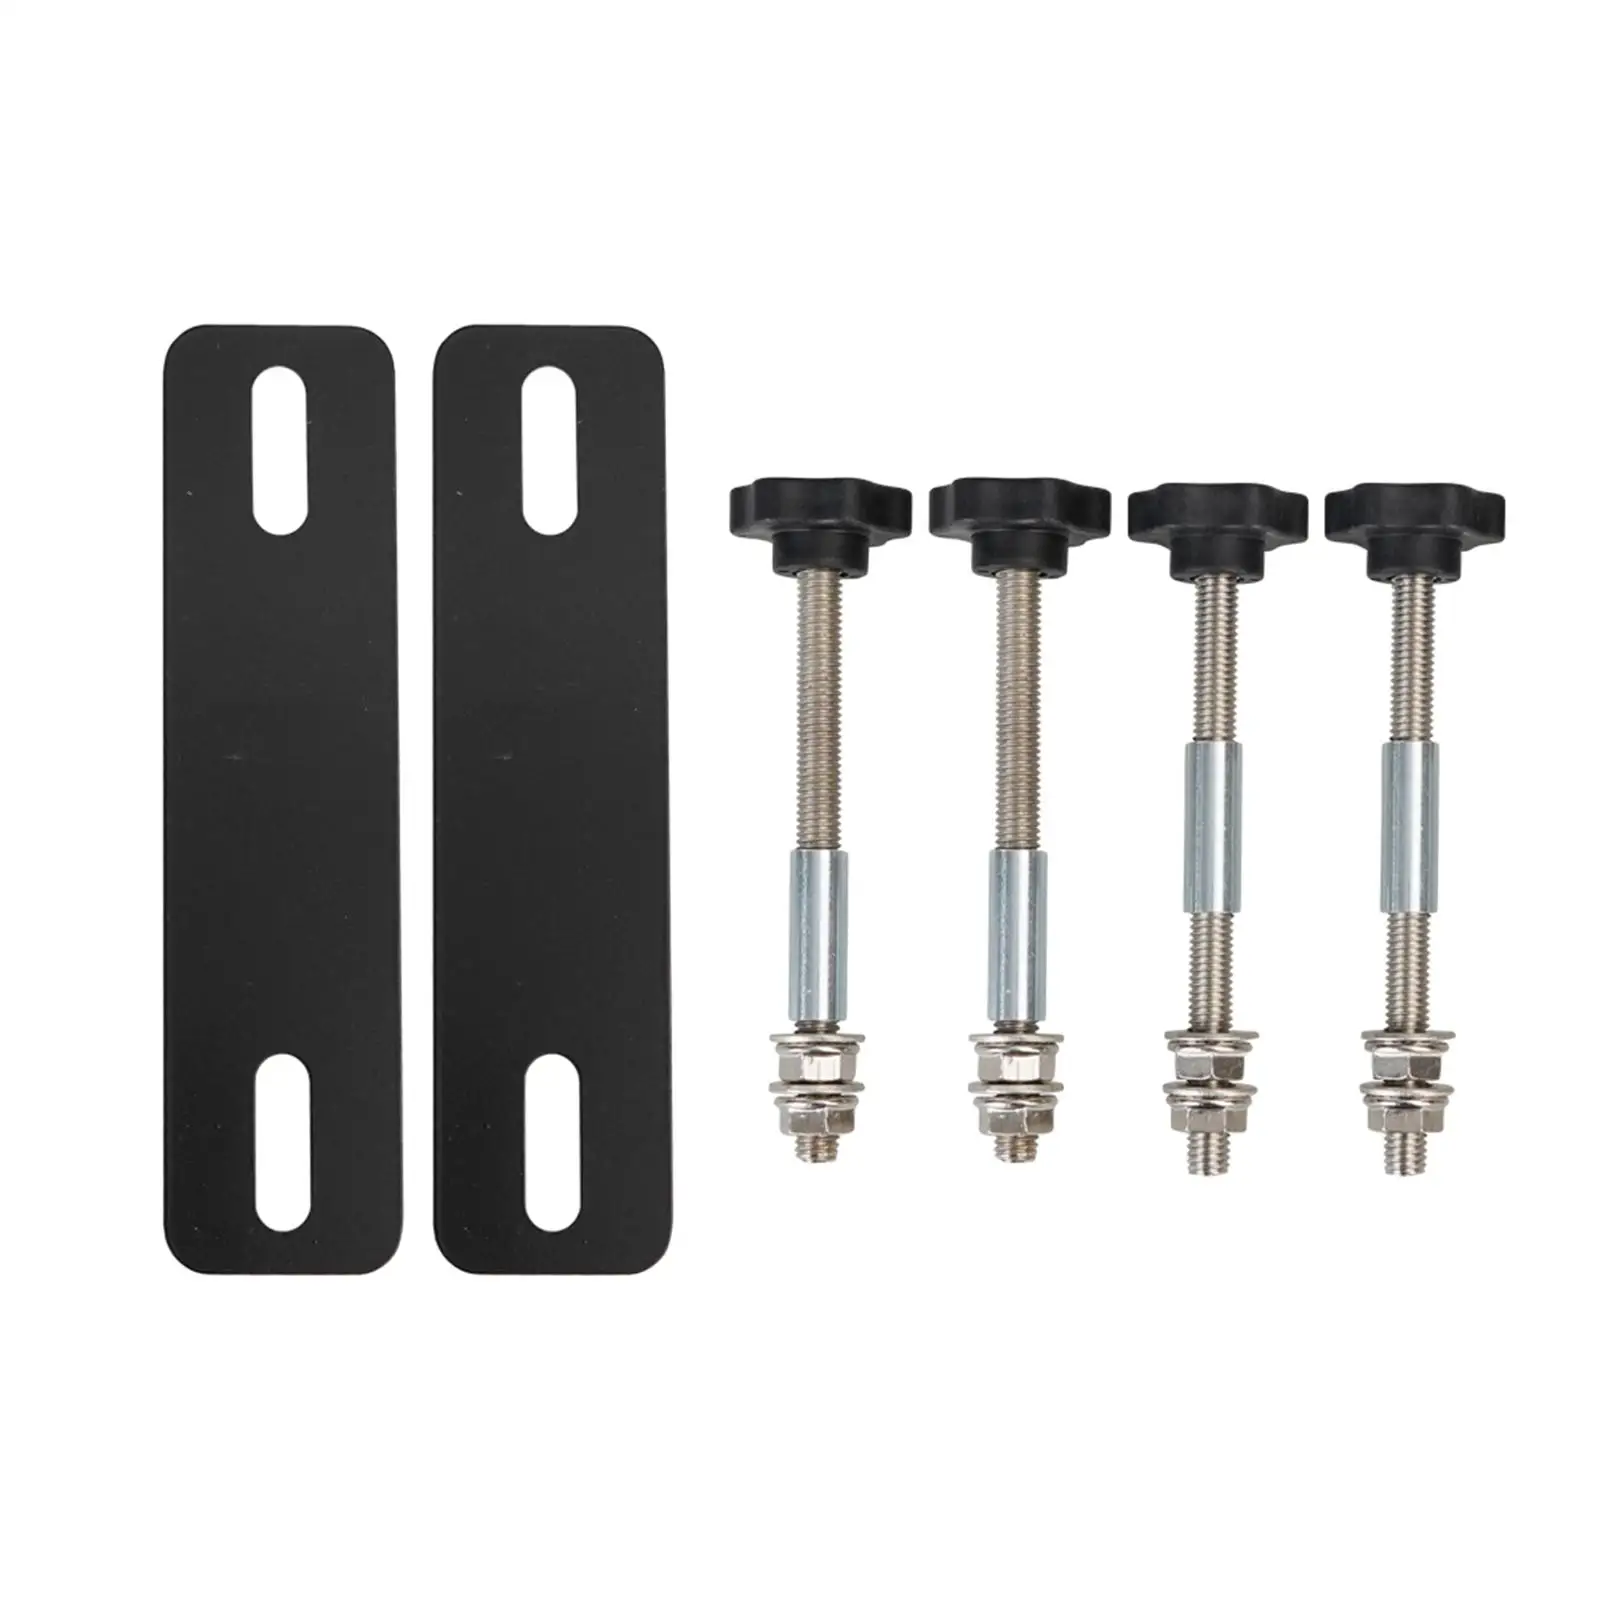 Recovery Track Mounting Pins Kits Easy to Install Easy to Use Replaces Professional Spare Parts 4.72